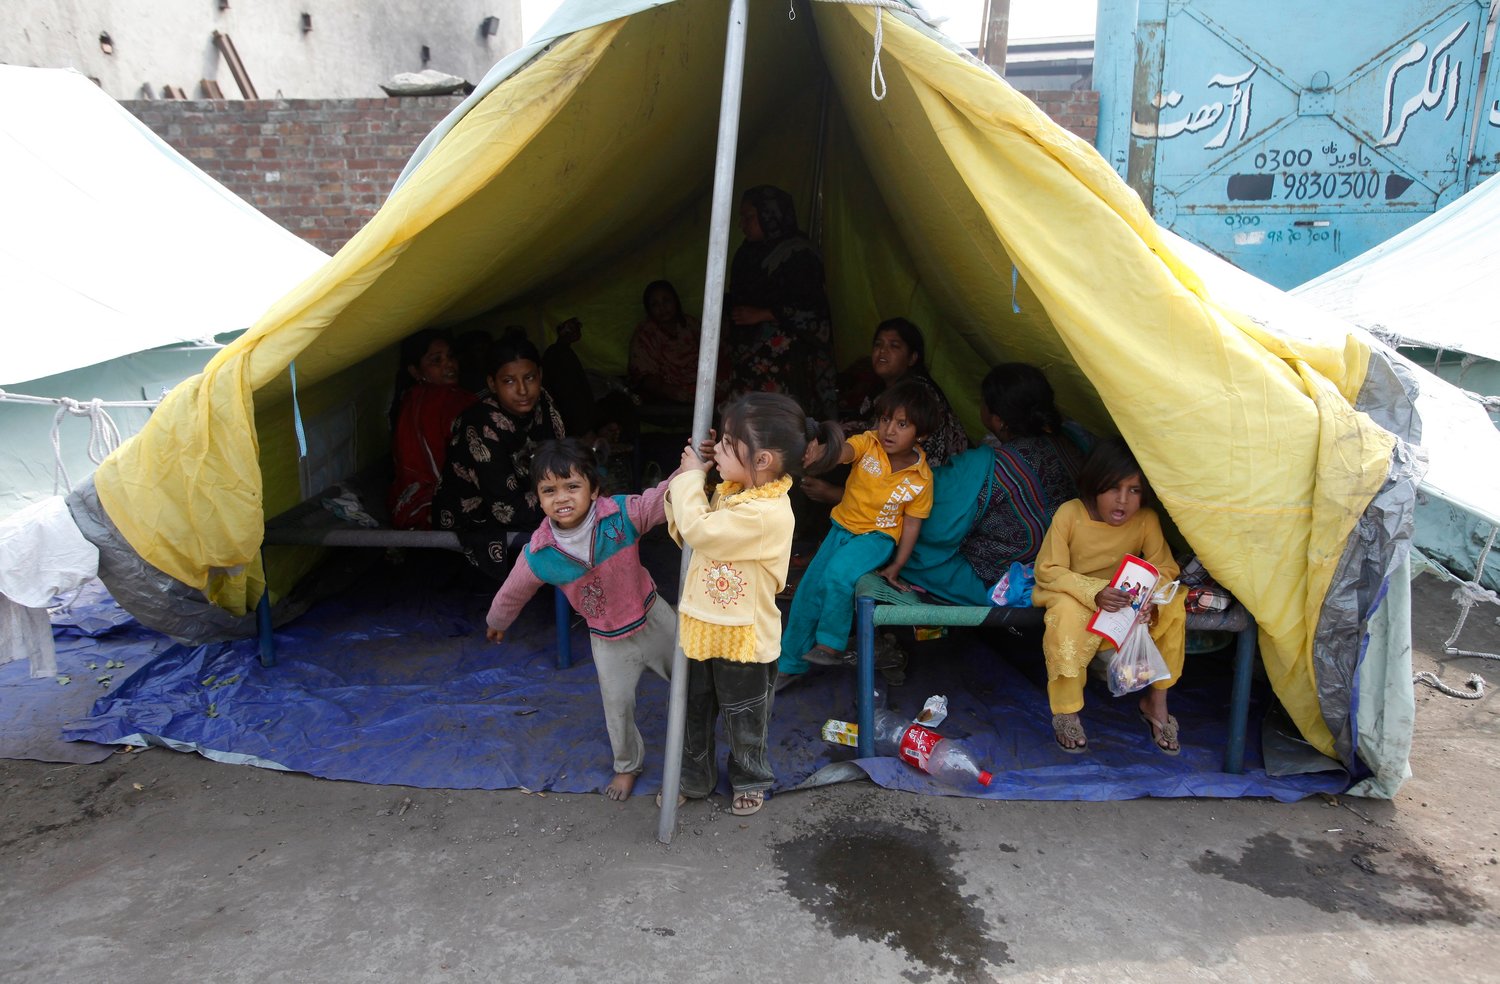 Pakistani Christian children play in front of tents provided for Christian families whose homes were set on fire by a mob, in Lahore, Pakistan, in this March 12, 2013, file photo. In a video message released by the Pope’s Worldwide Prayer Network Jan. 3, the pope dedicated his prayer intention for people who suffer from religious discrimination and persecution.